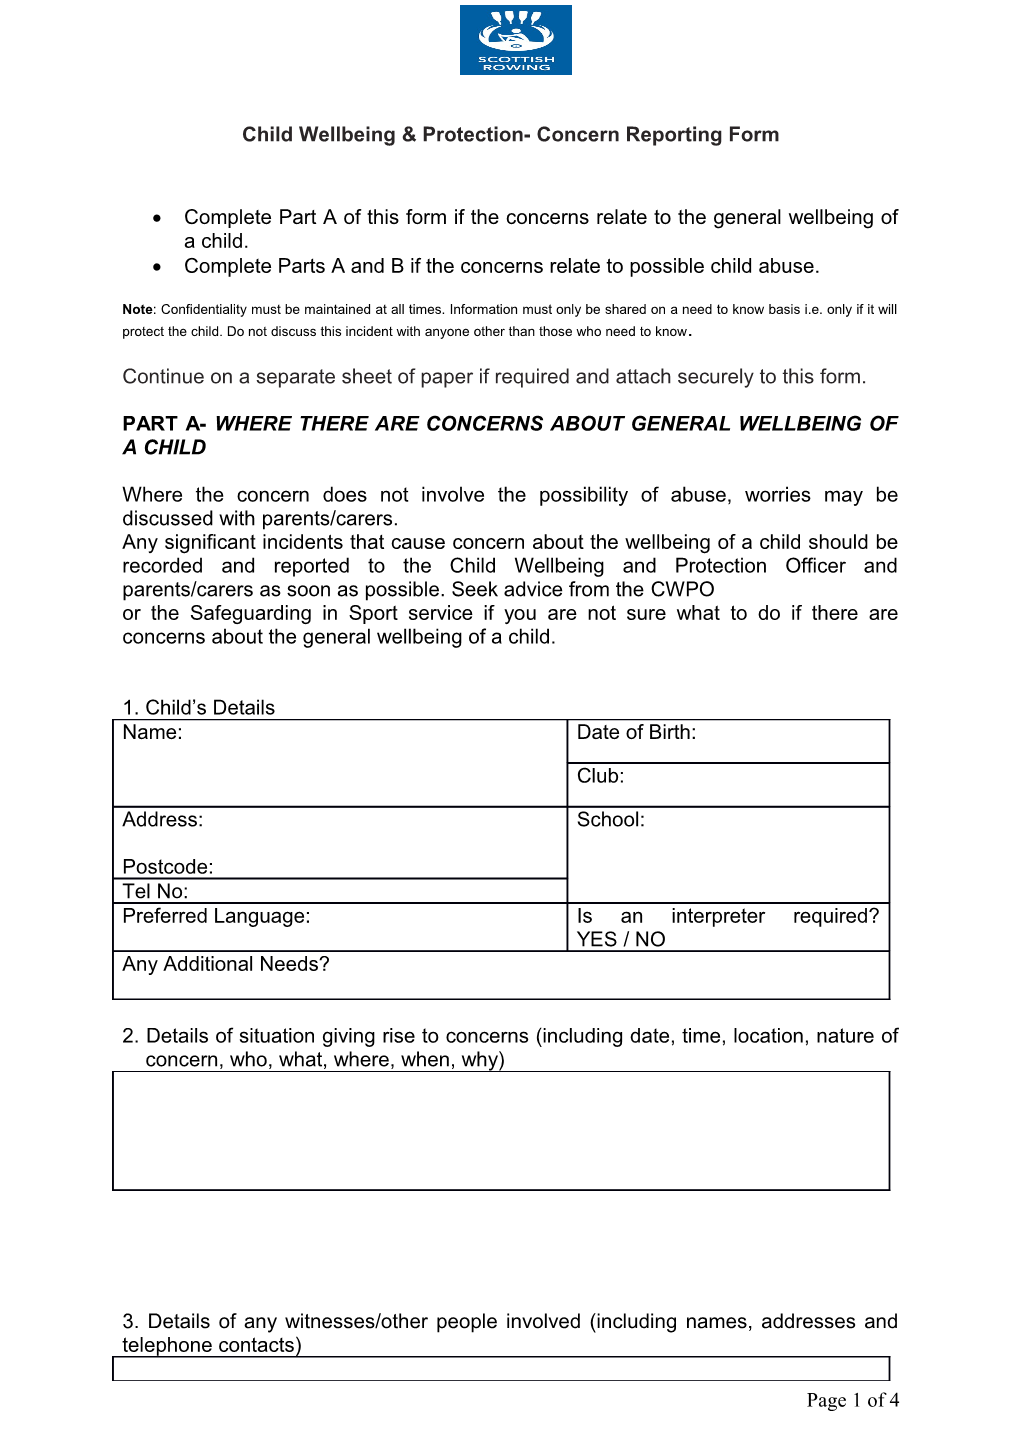 Child Wellbeing & Protection- Concern Reporting Form